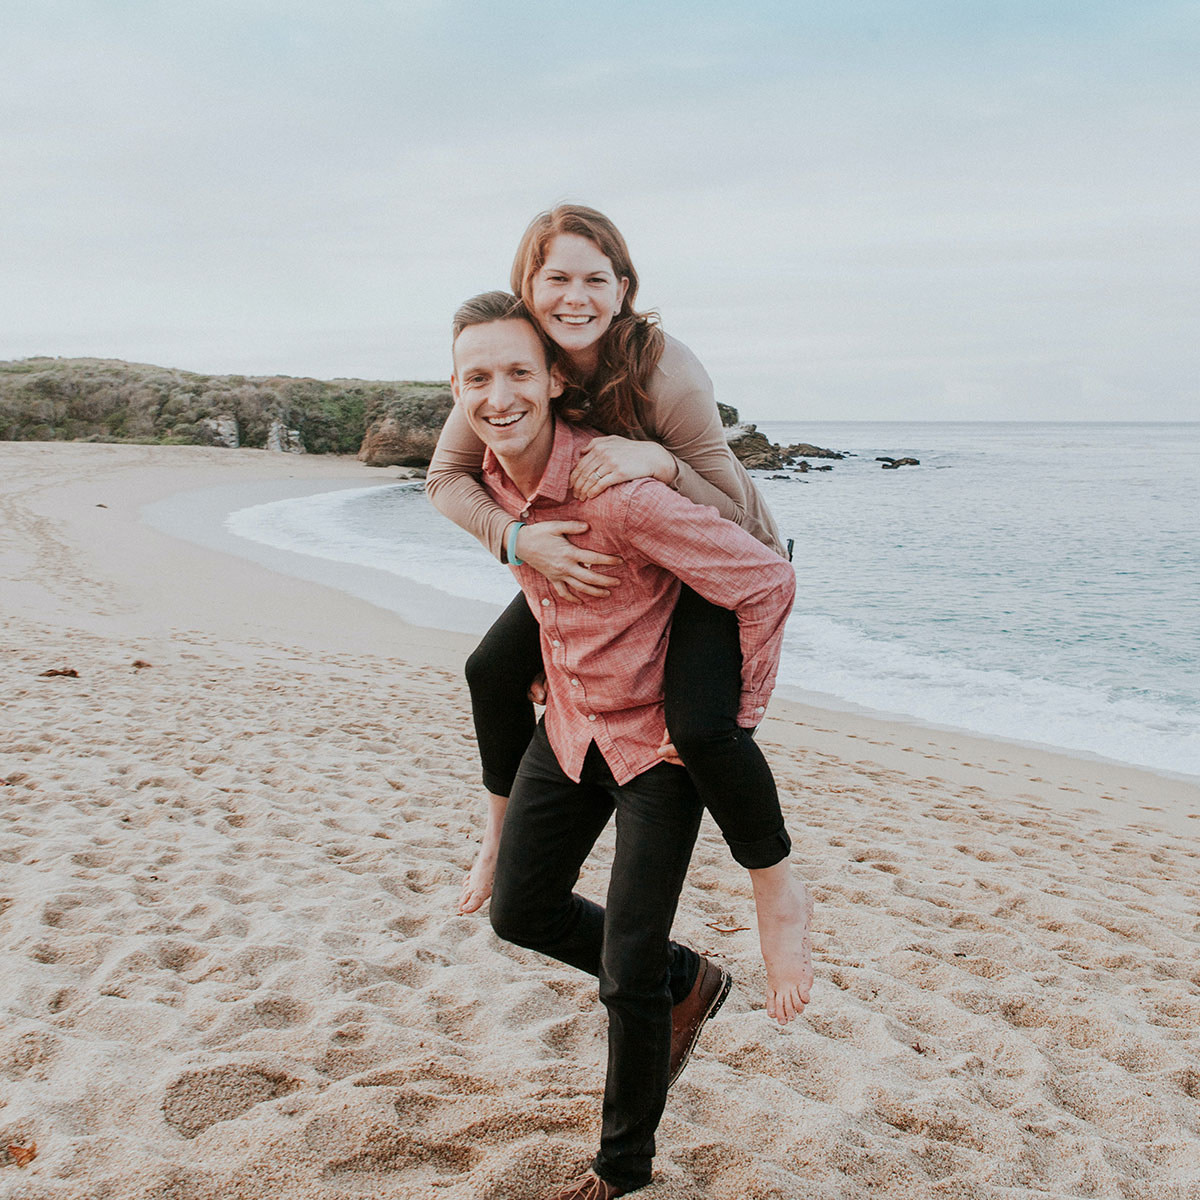 Younger couple in nice clothes at the beach. Man is carrying woman piggyback style.